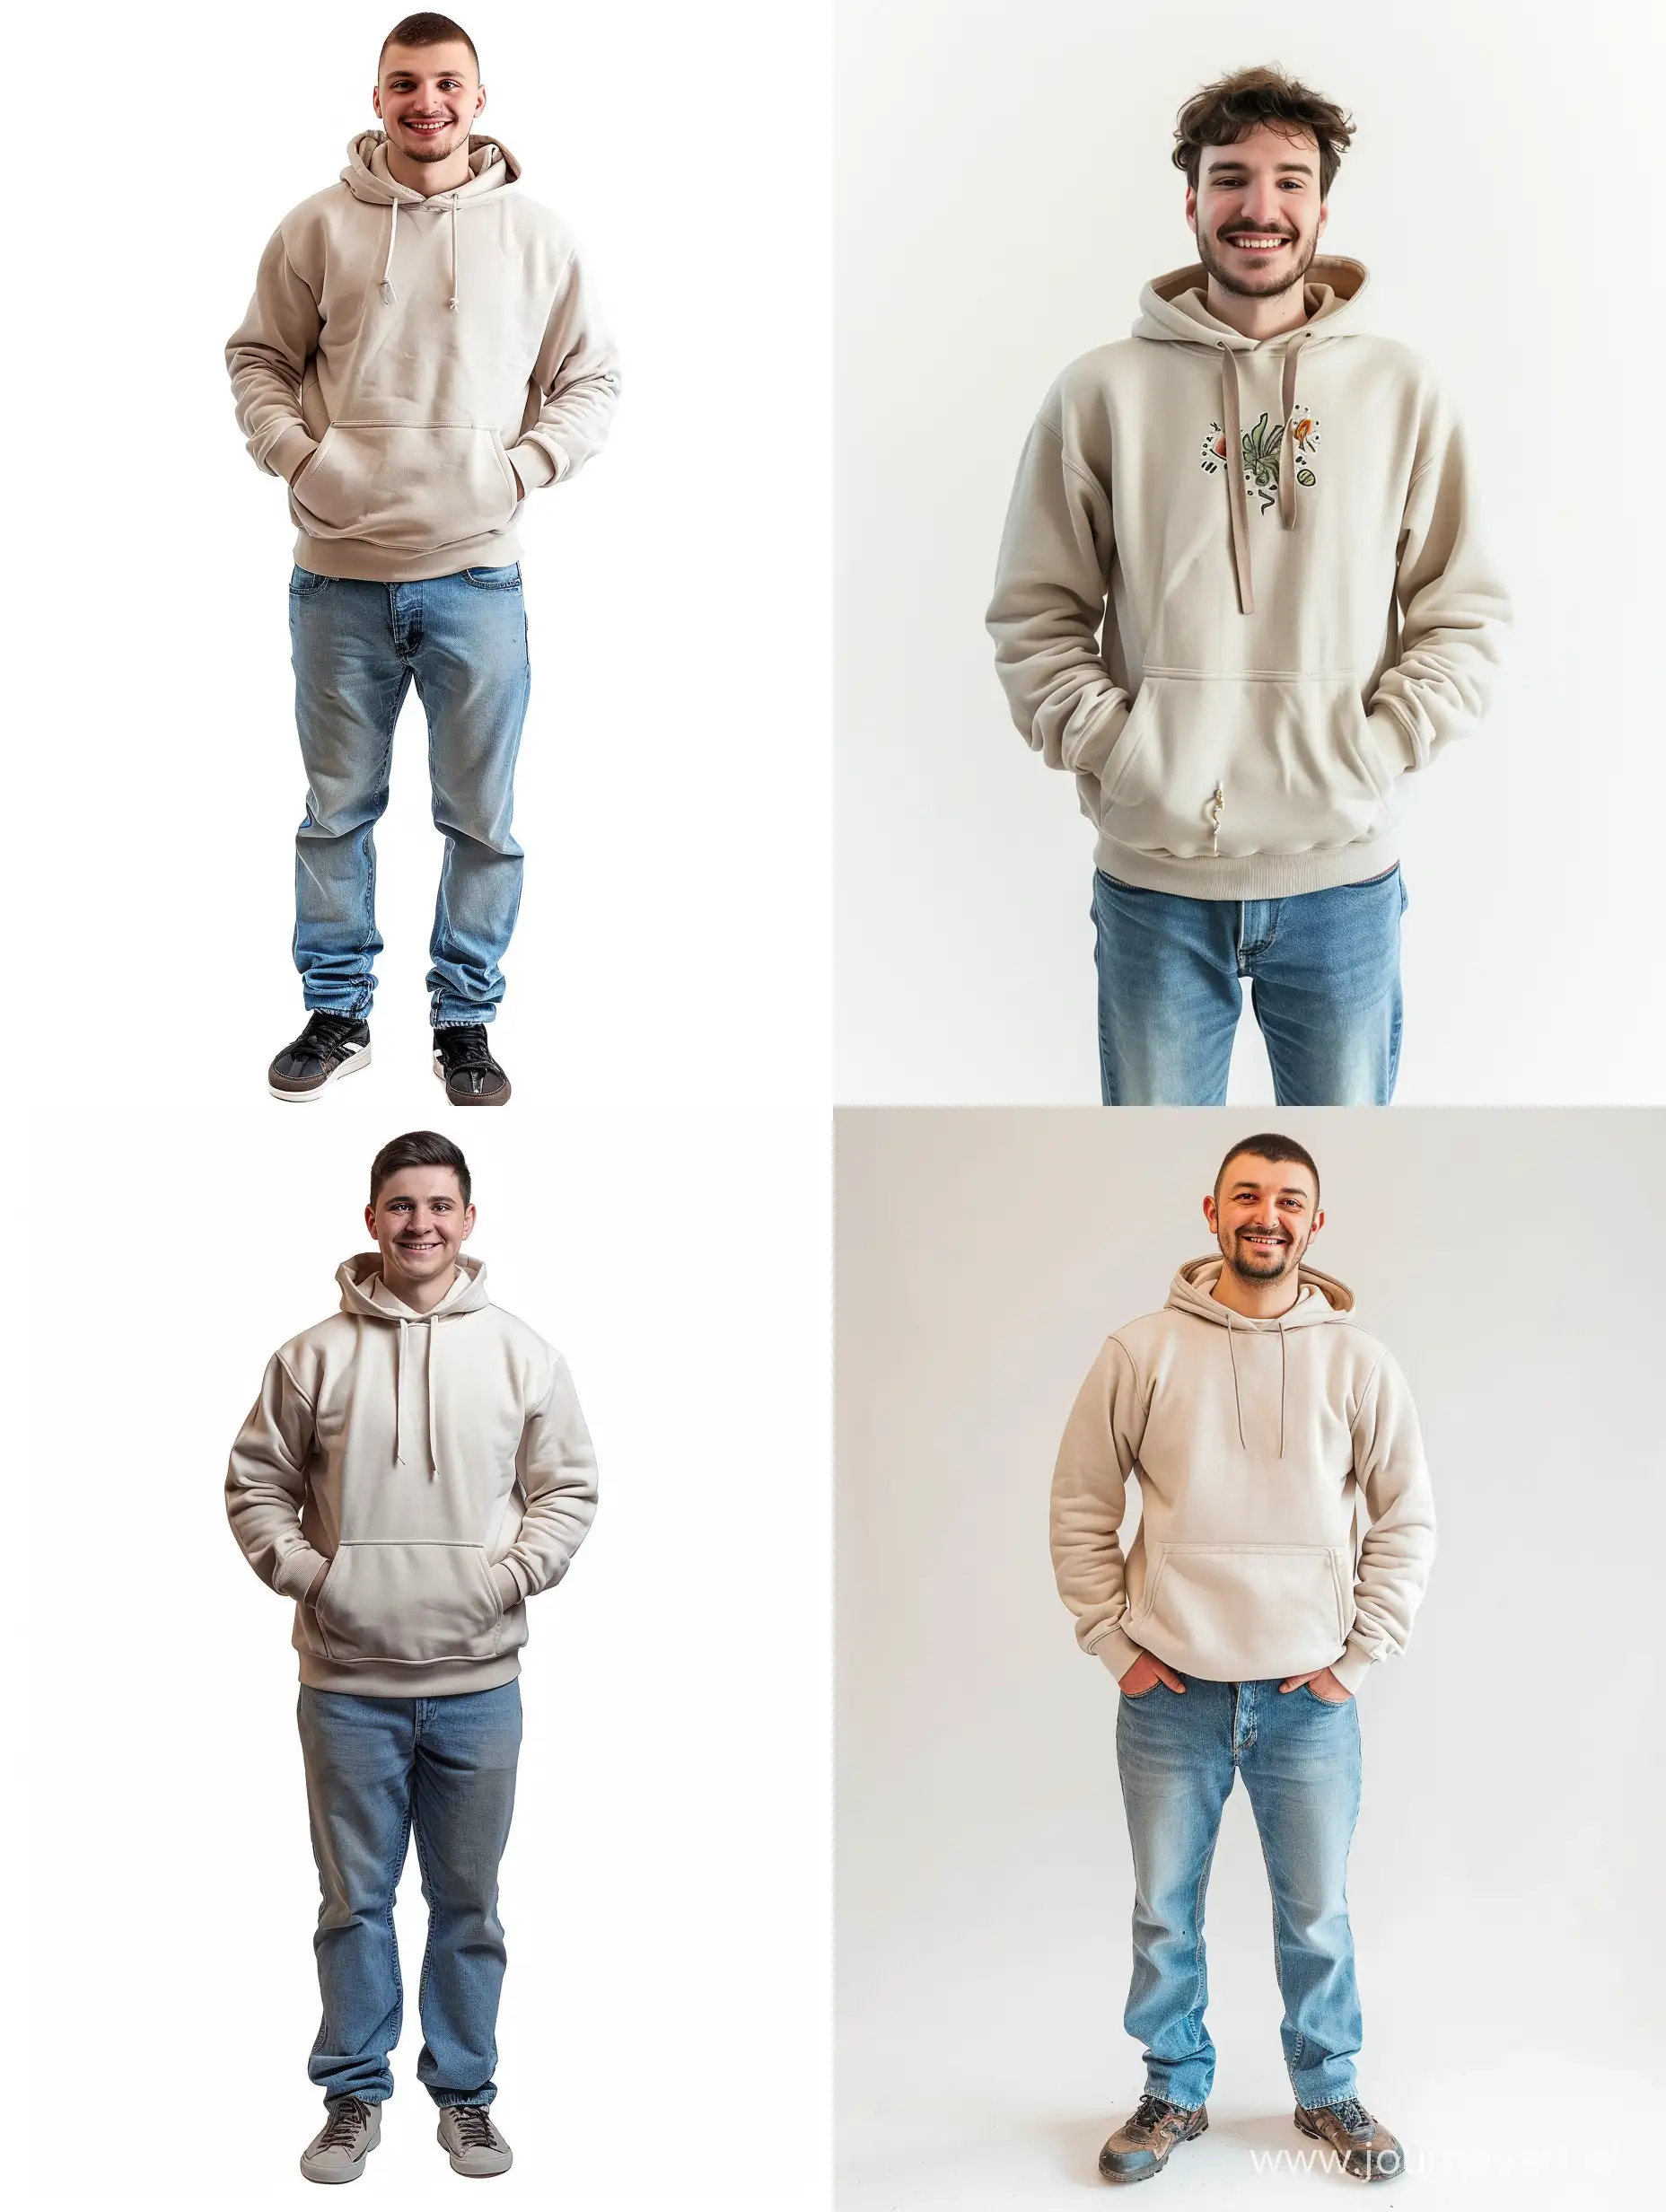 Cheerful-Man-in-Beige-Sweatshirt-and-Blue-Jeans-on-White-Background